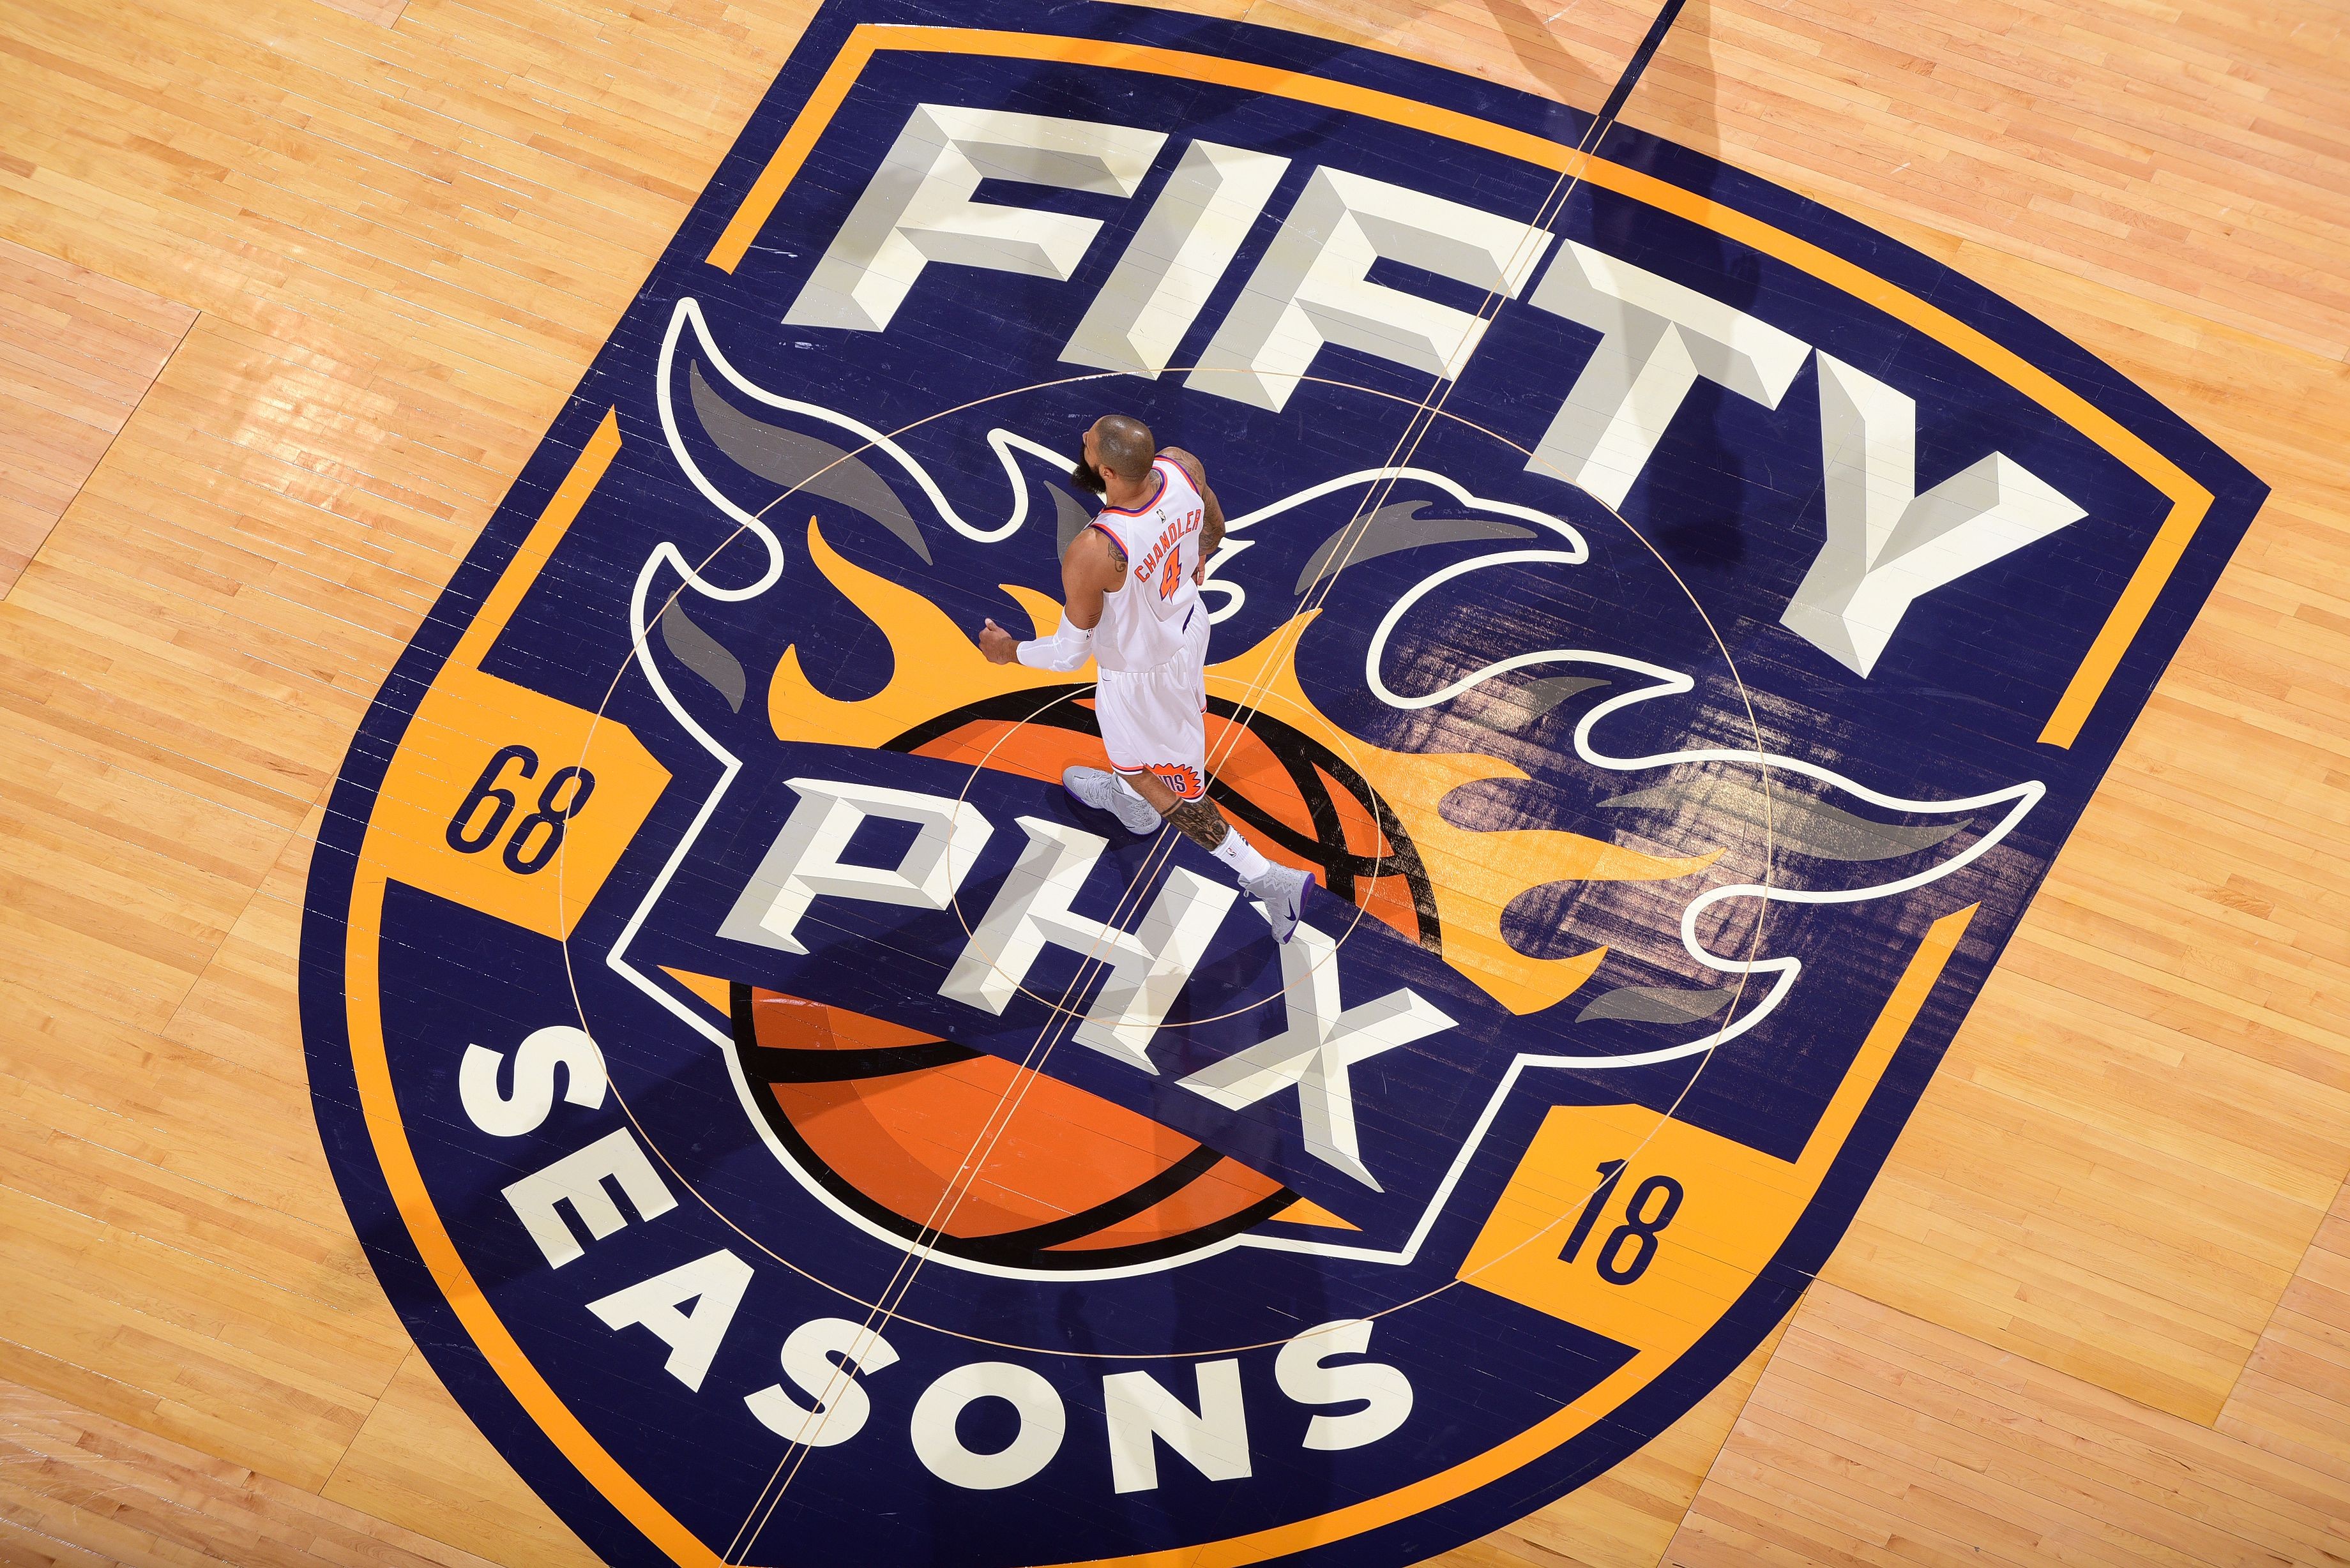 Reviewing the Suns’ ‘City’ edition Nike uniform